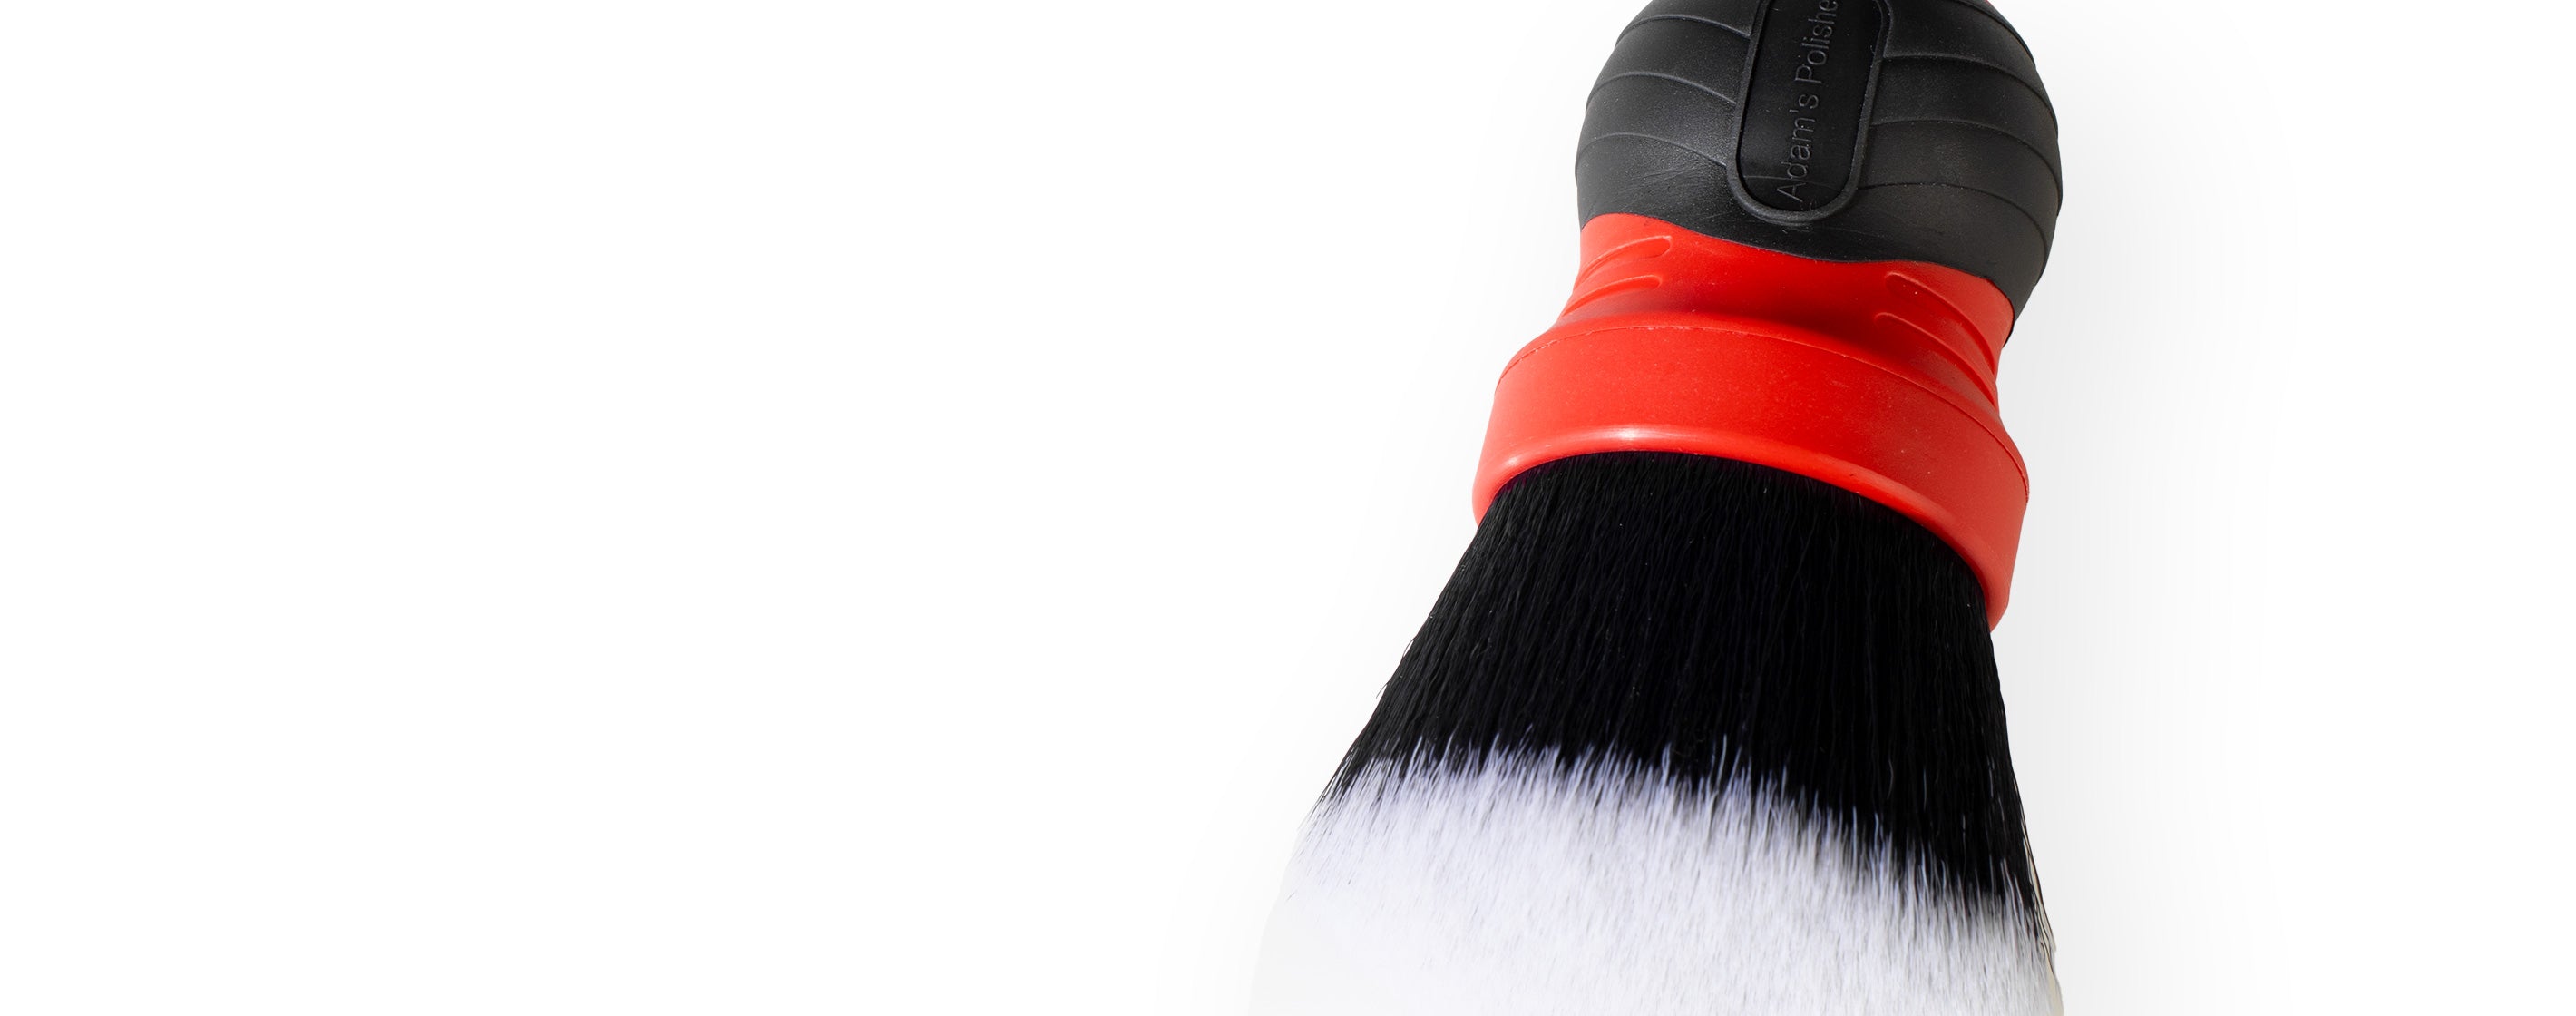 Large Stiff Bristle Detailing Brush 704609. Professional Detailing  Products, Because Your Car is a Reflection of You